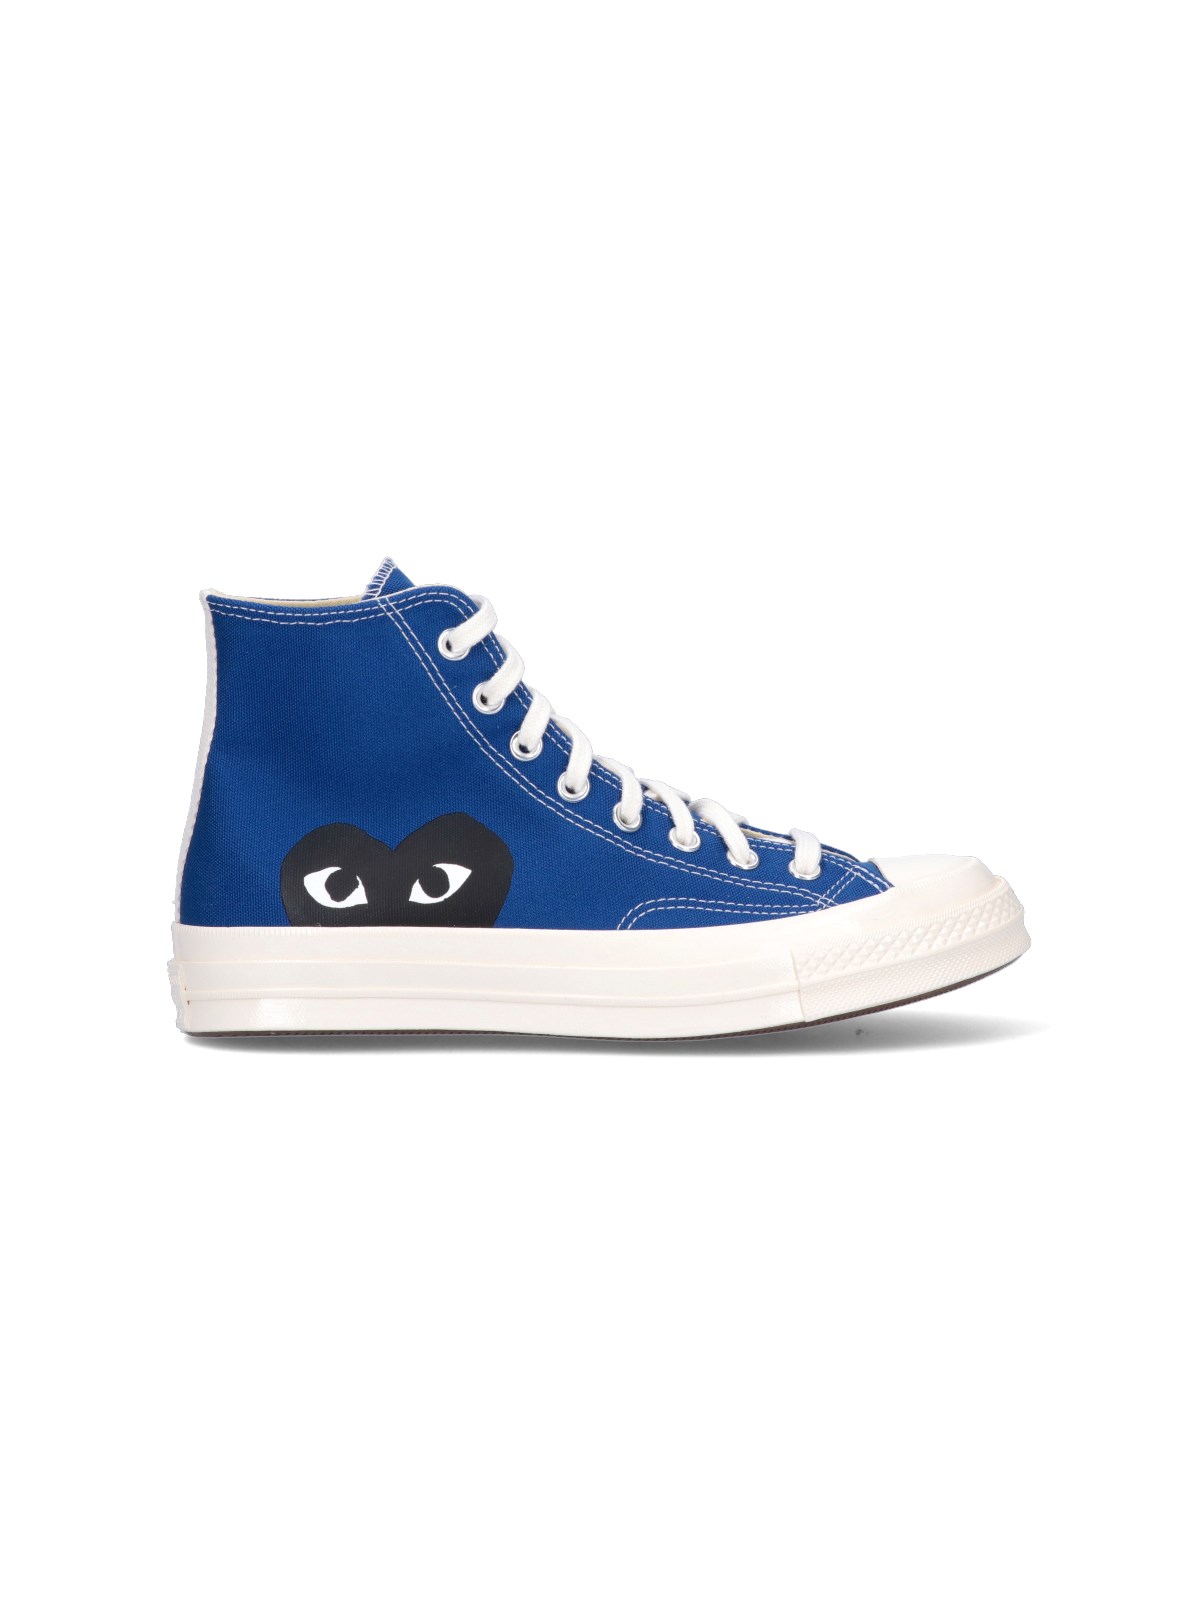 Comme Des Garçons Play Chuck Taylor Trainers In Blue